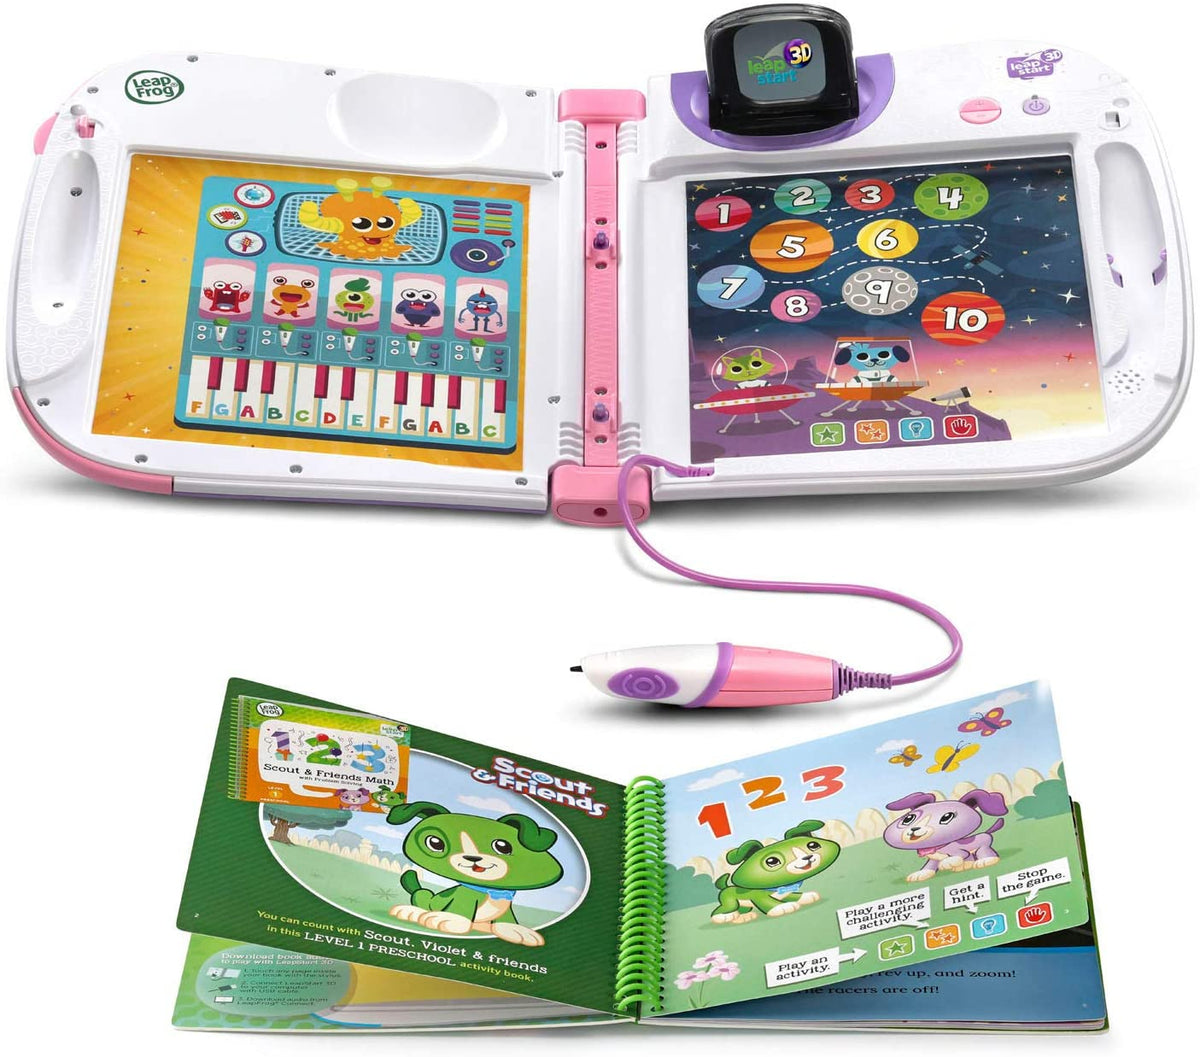 LeapFrog LeapStart 3D Interactive Learning Education System Resources, Pink